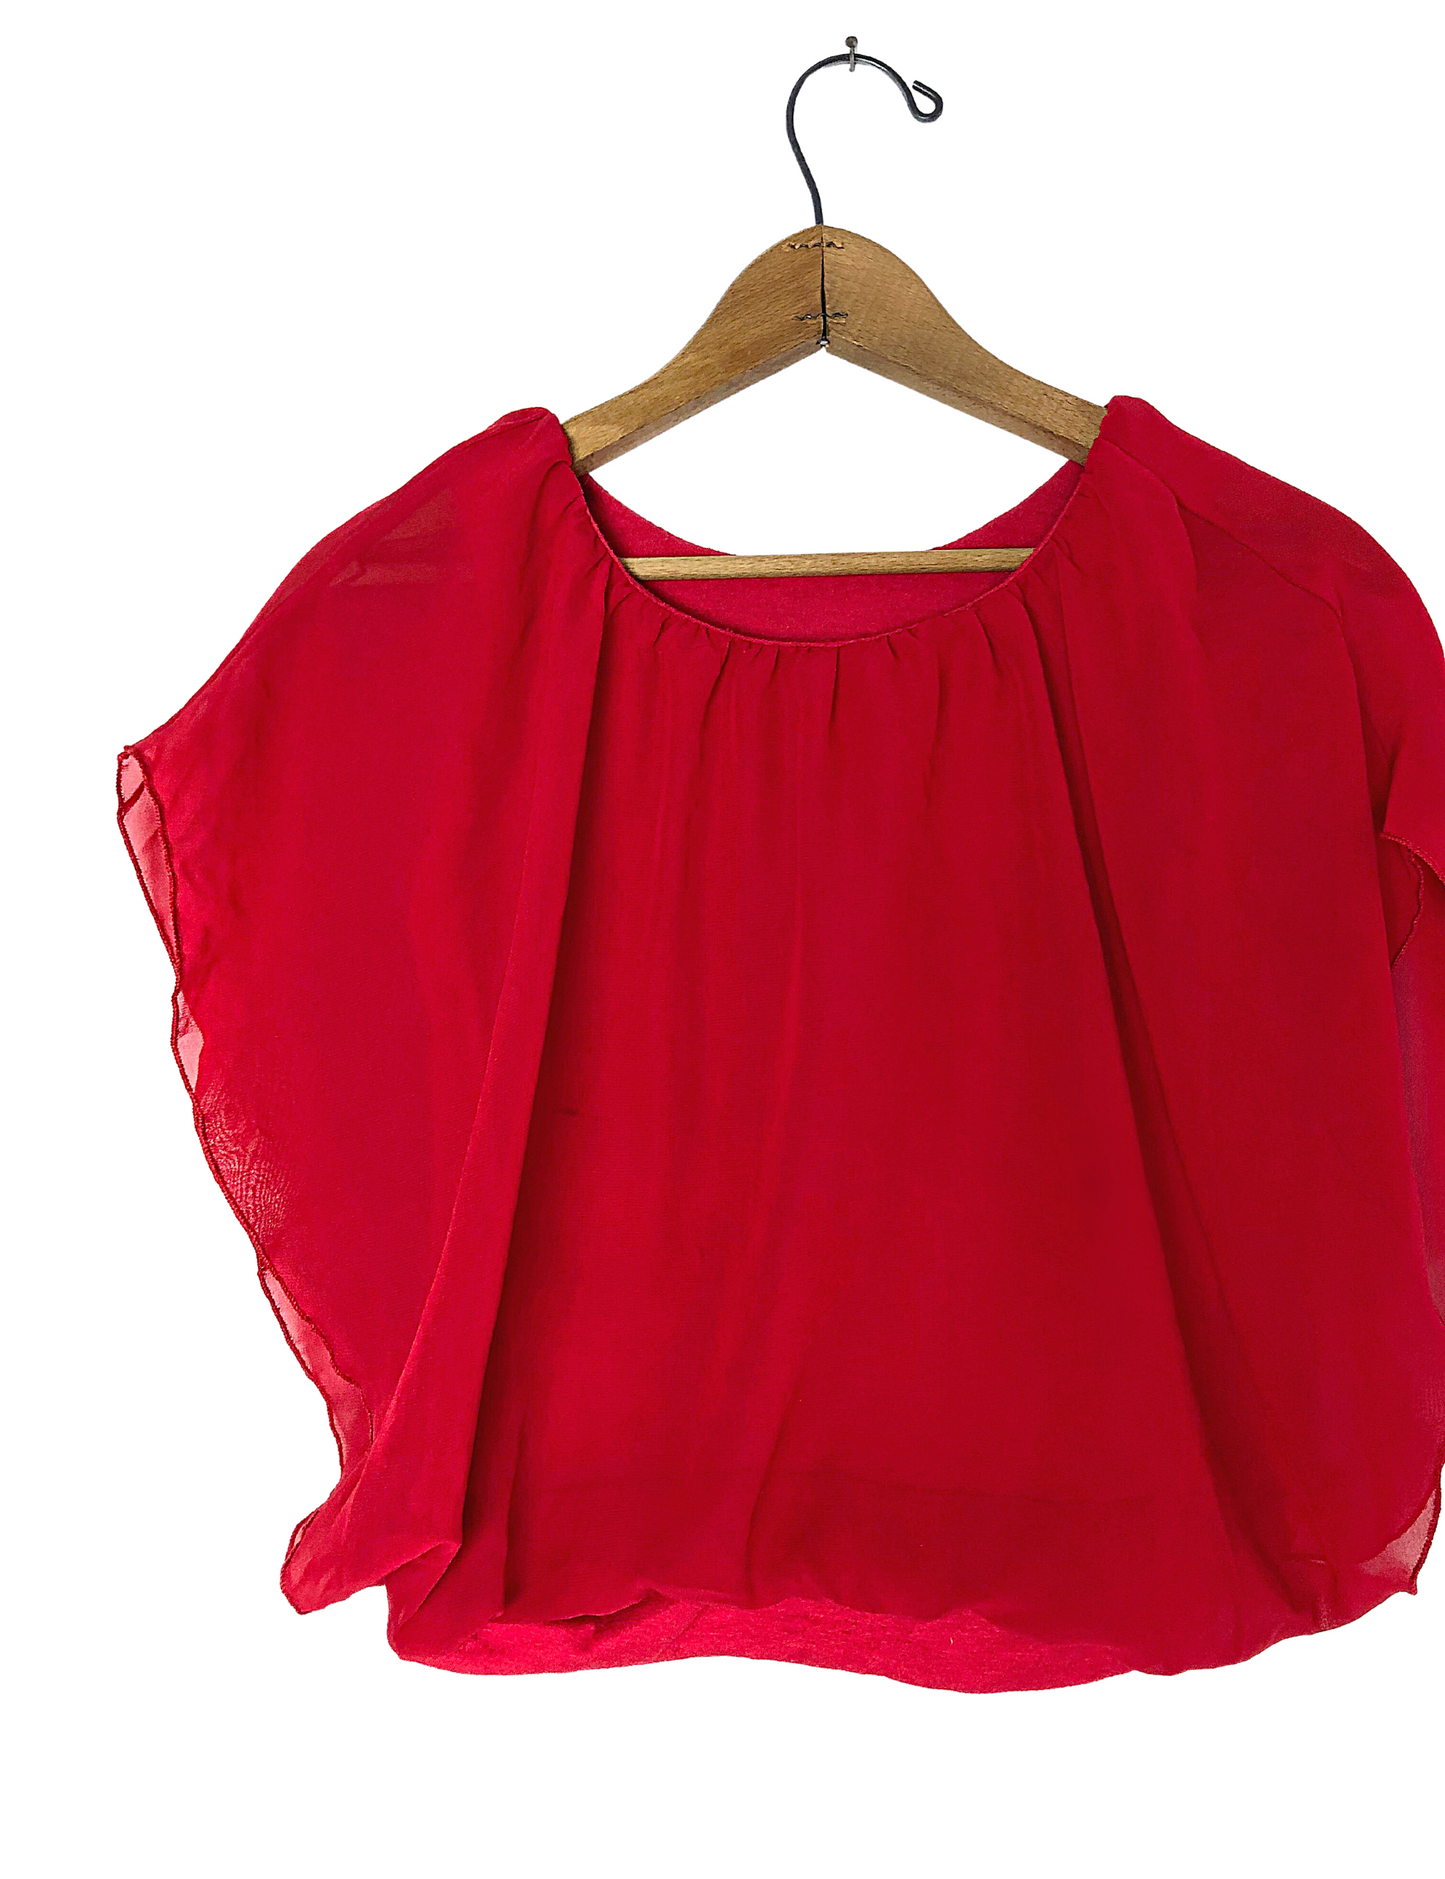 80’s Cherry Red Sheer Chiffon Butterfly Top Size Small